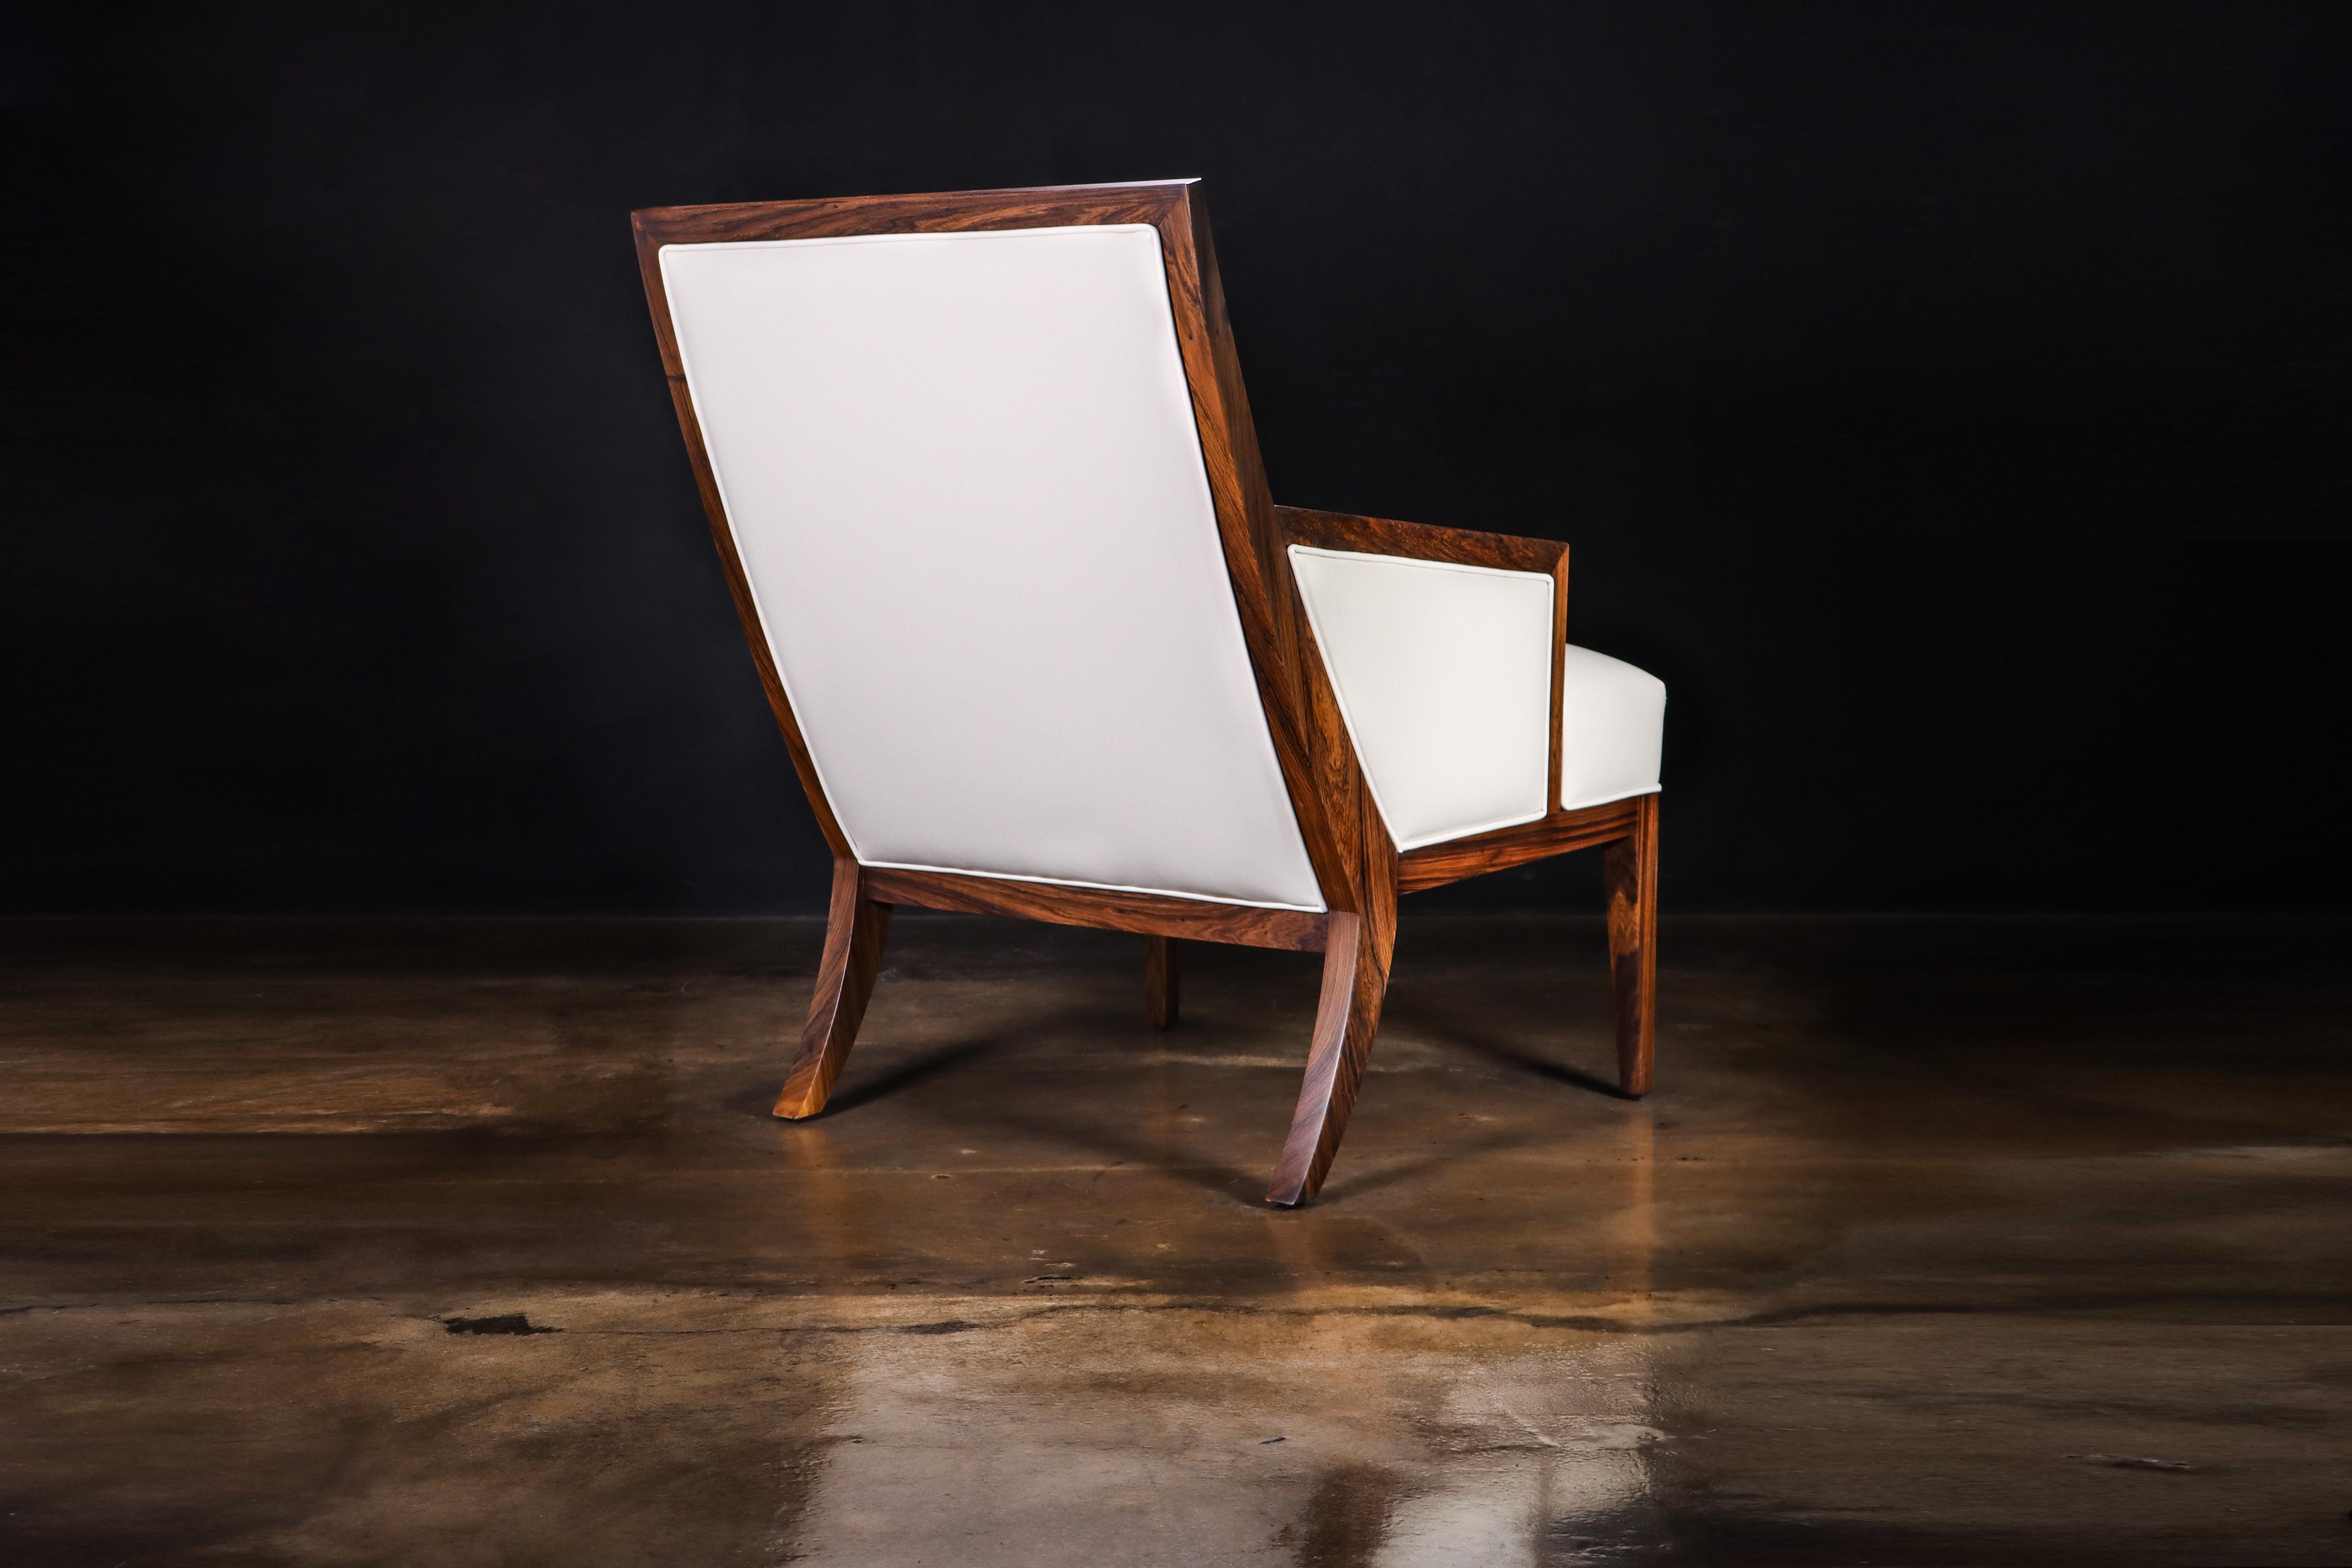 Modern Contemporary Lounge Chair in Wood and White Leather from Costantini, Belgrano For Sale